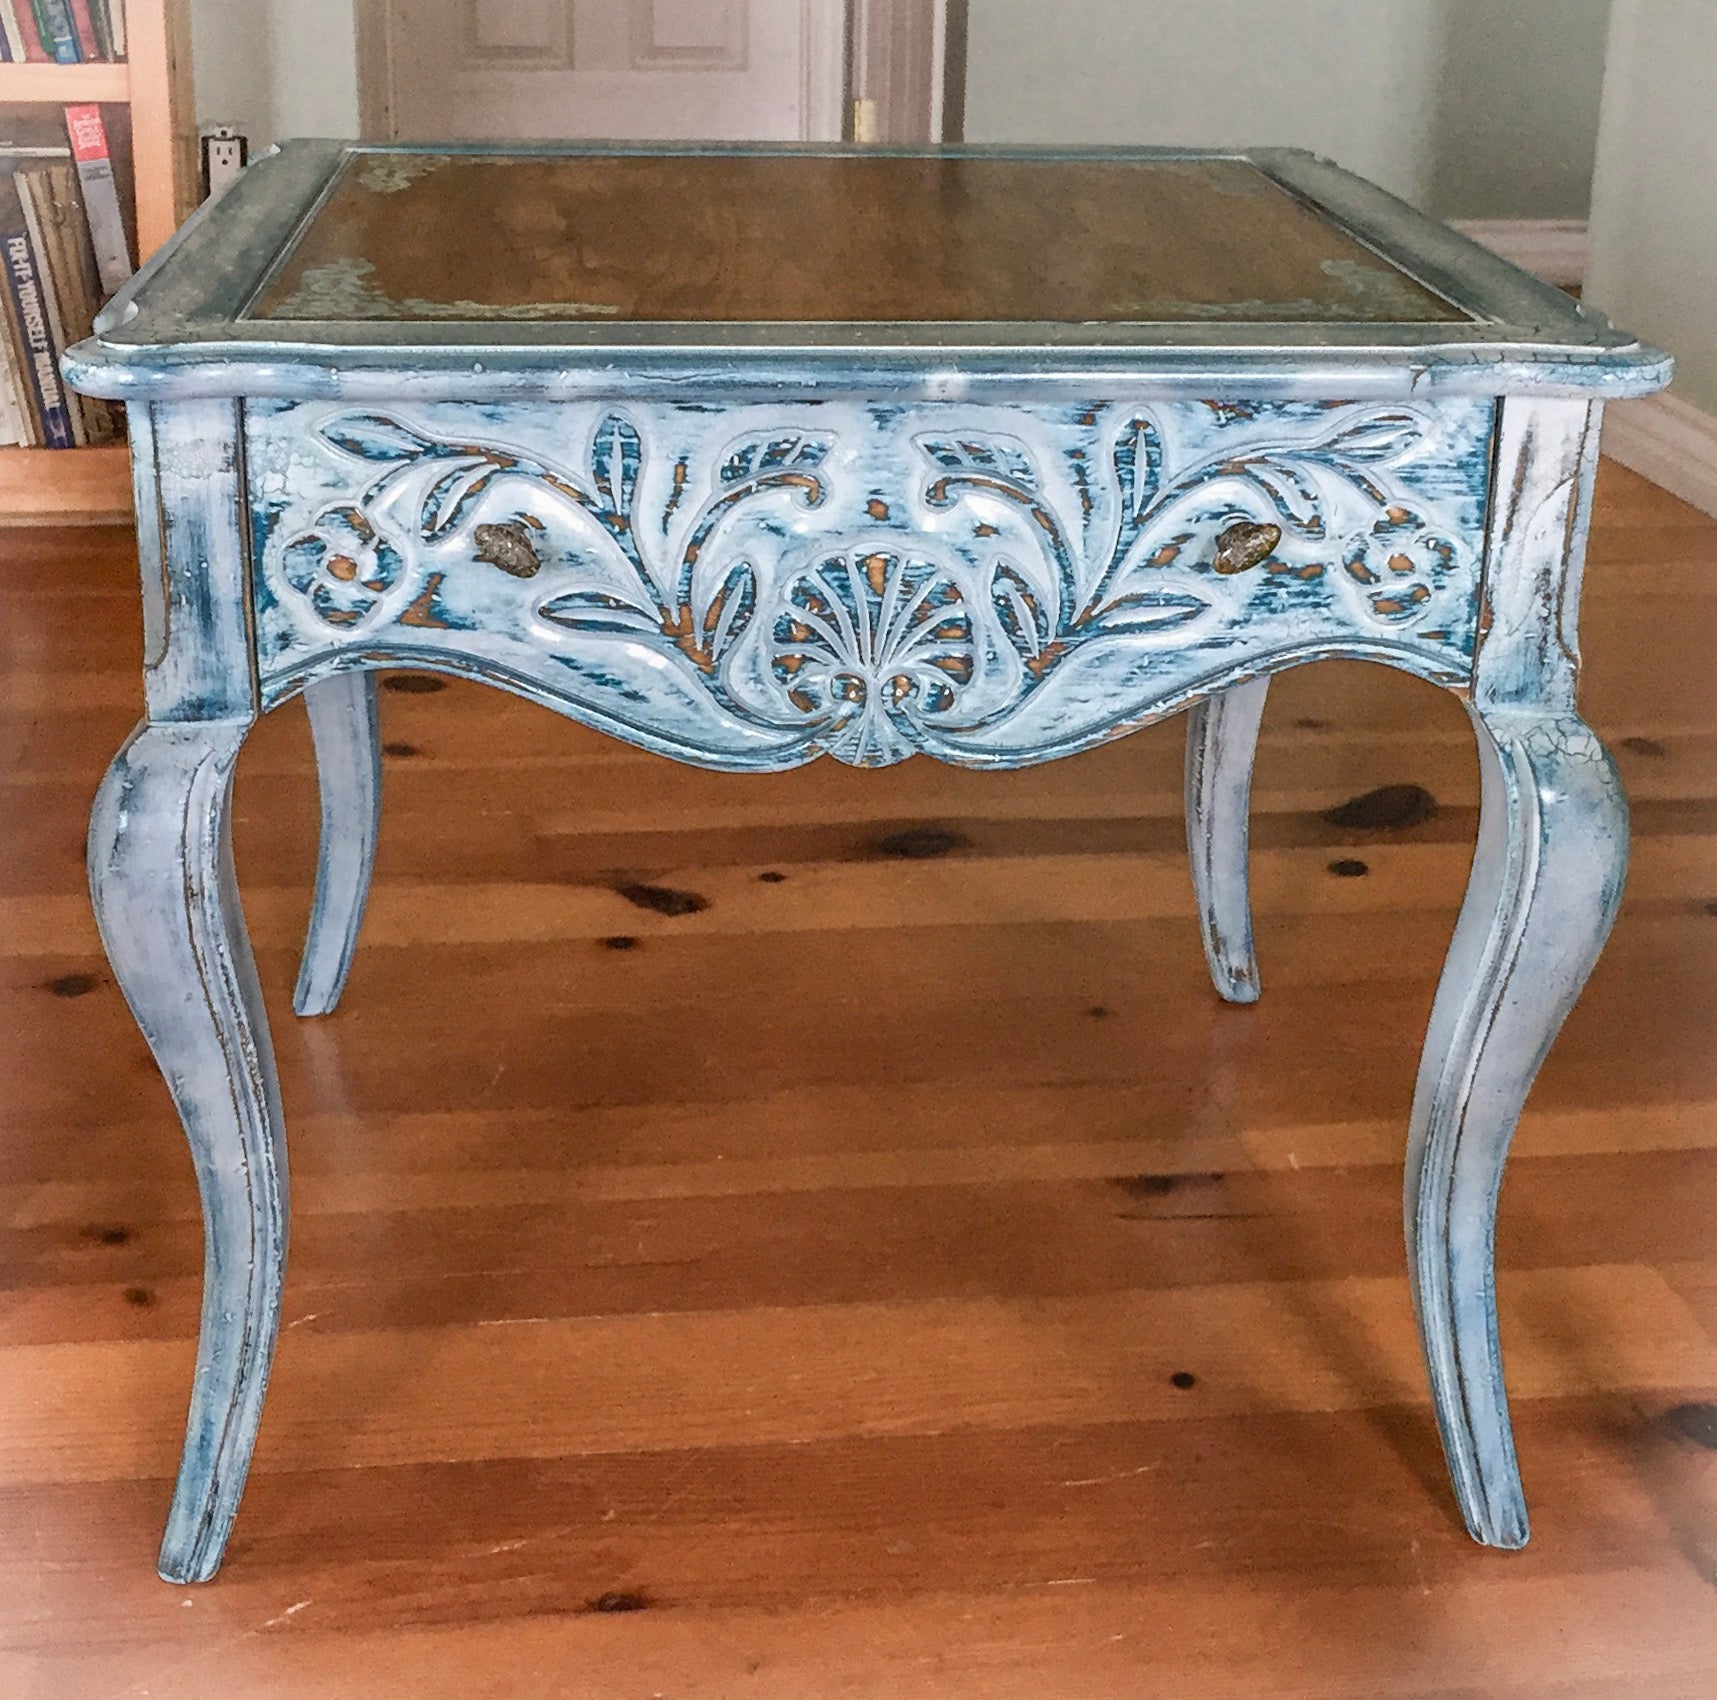 Front view of the side table shows wood carved accents on drawer, patina knobs & curved table legs.